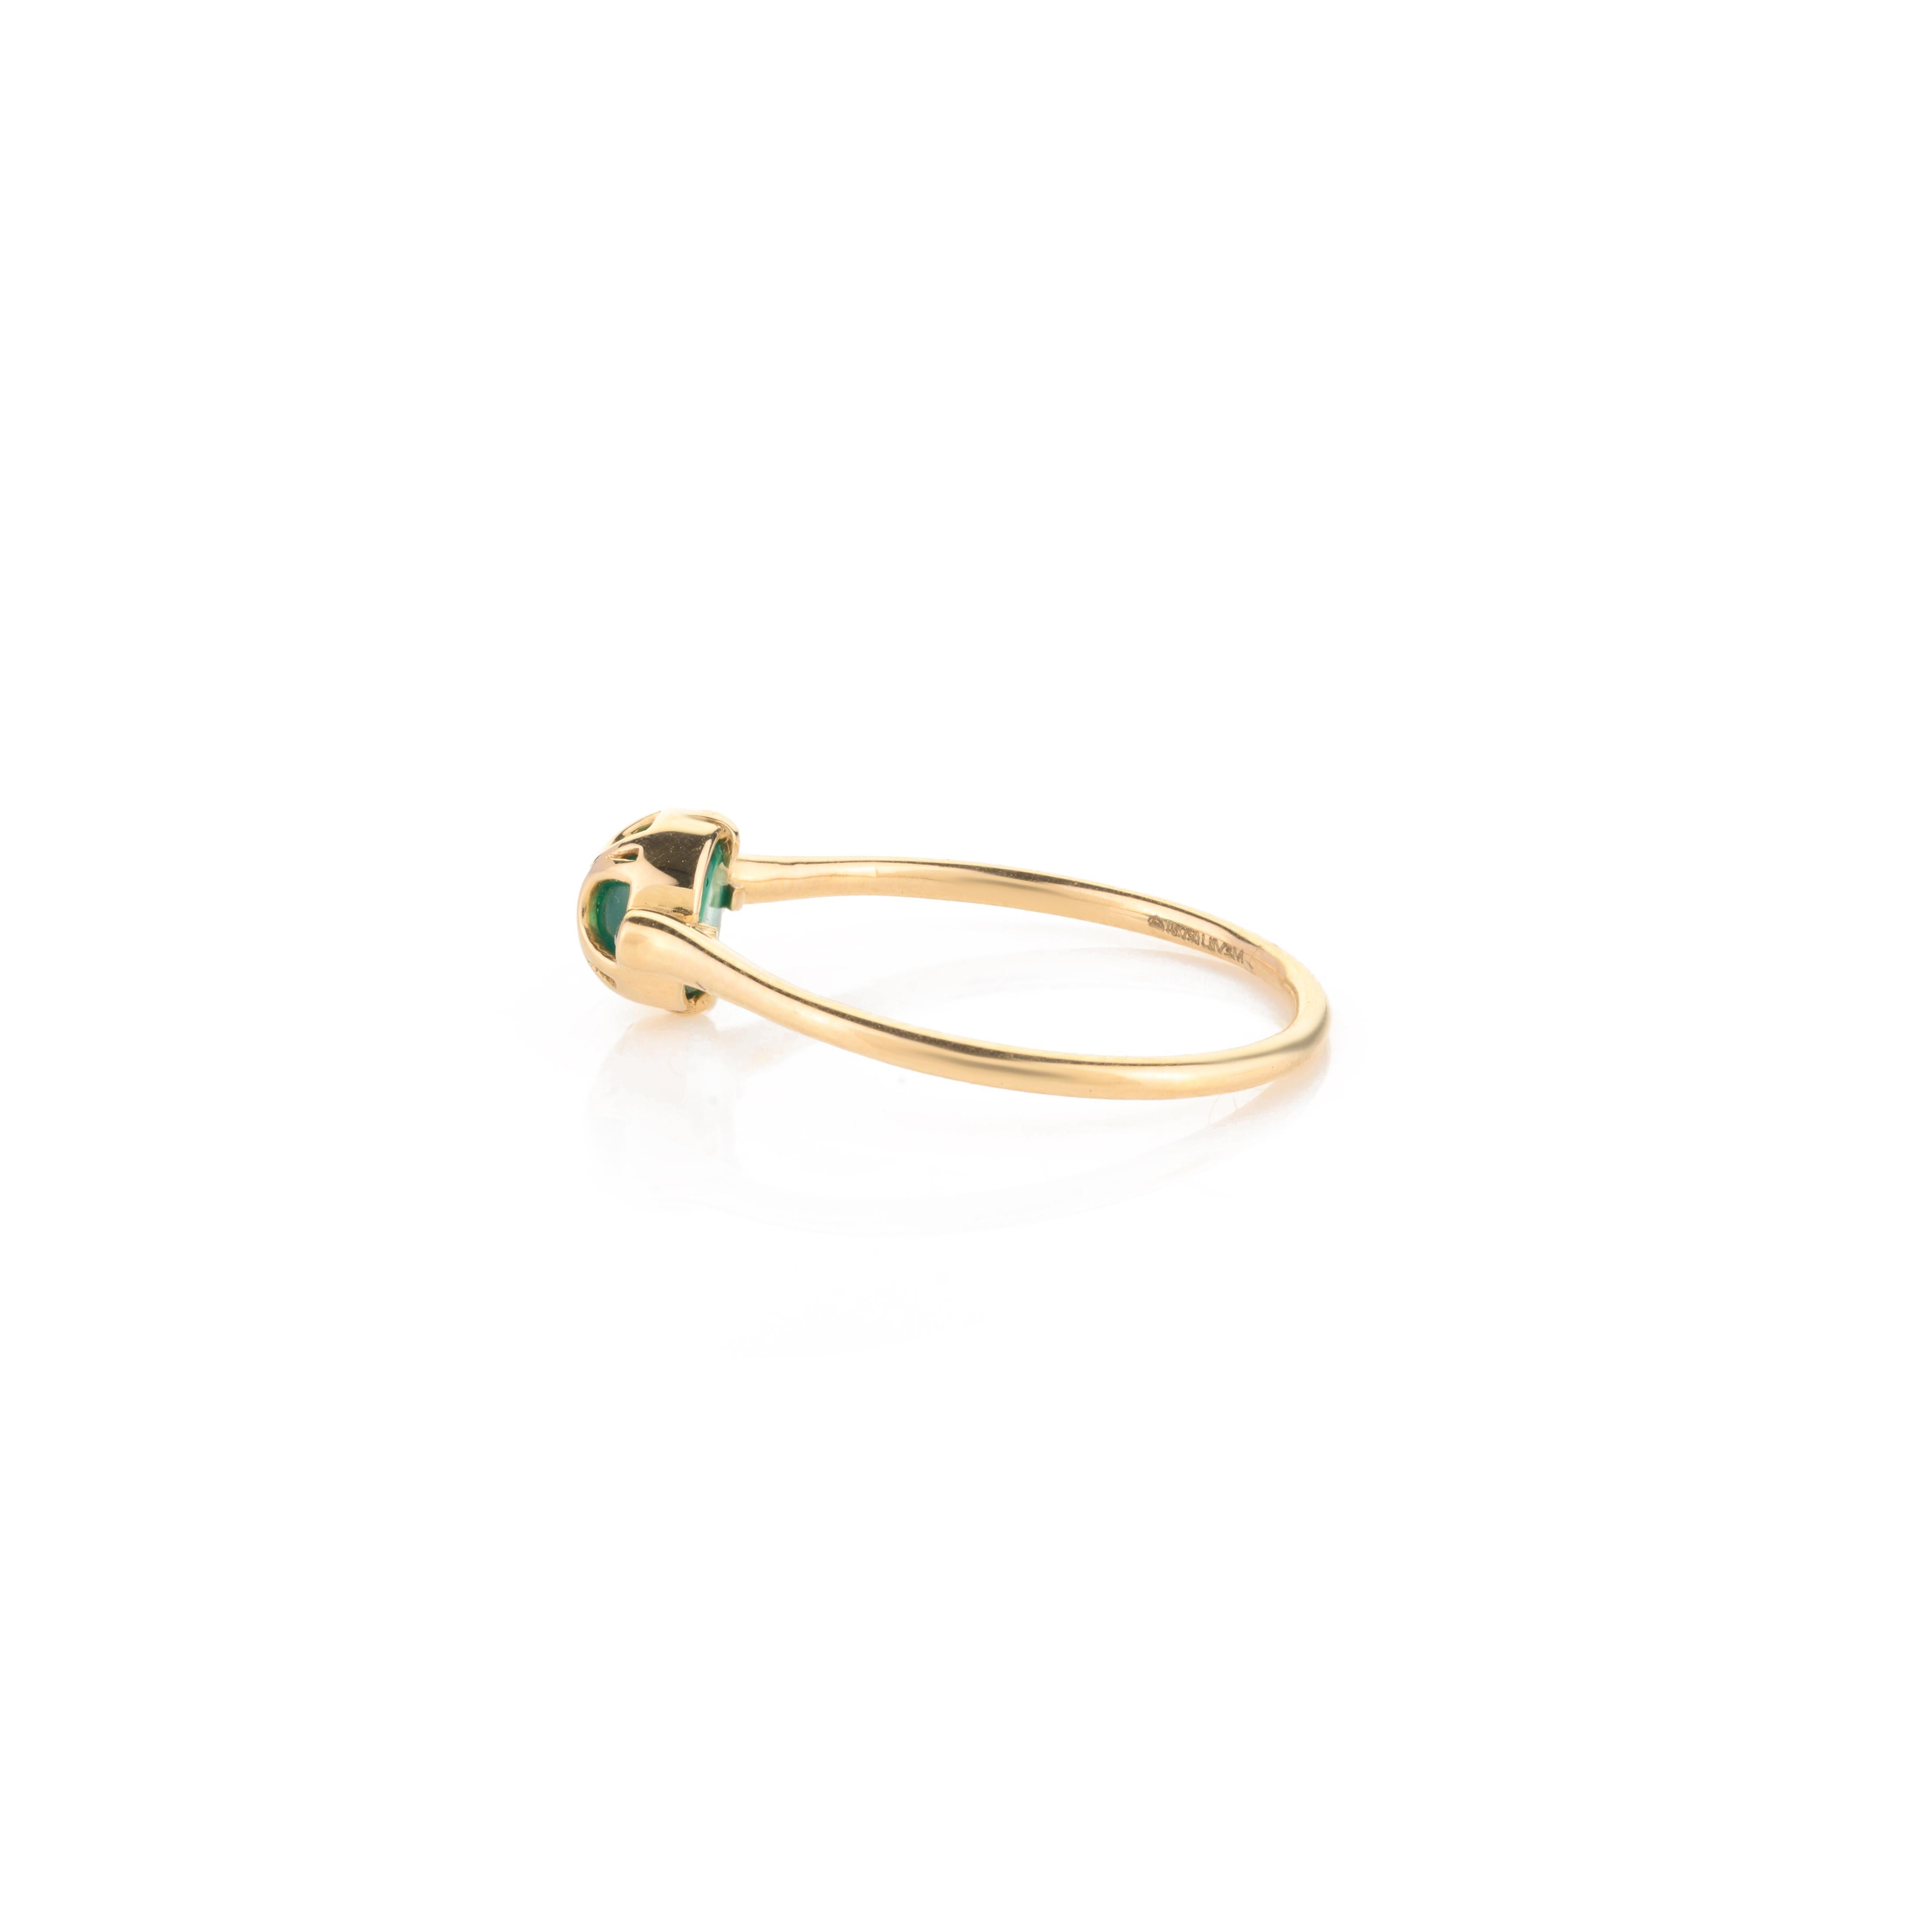 For Sale:  Modern 18k Solid Yellow Gold Green Onyx Minimalist Everyday Ring for Her 3